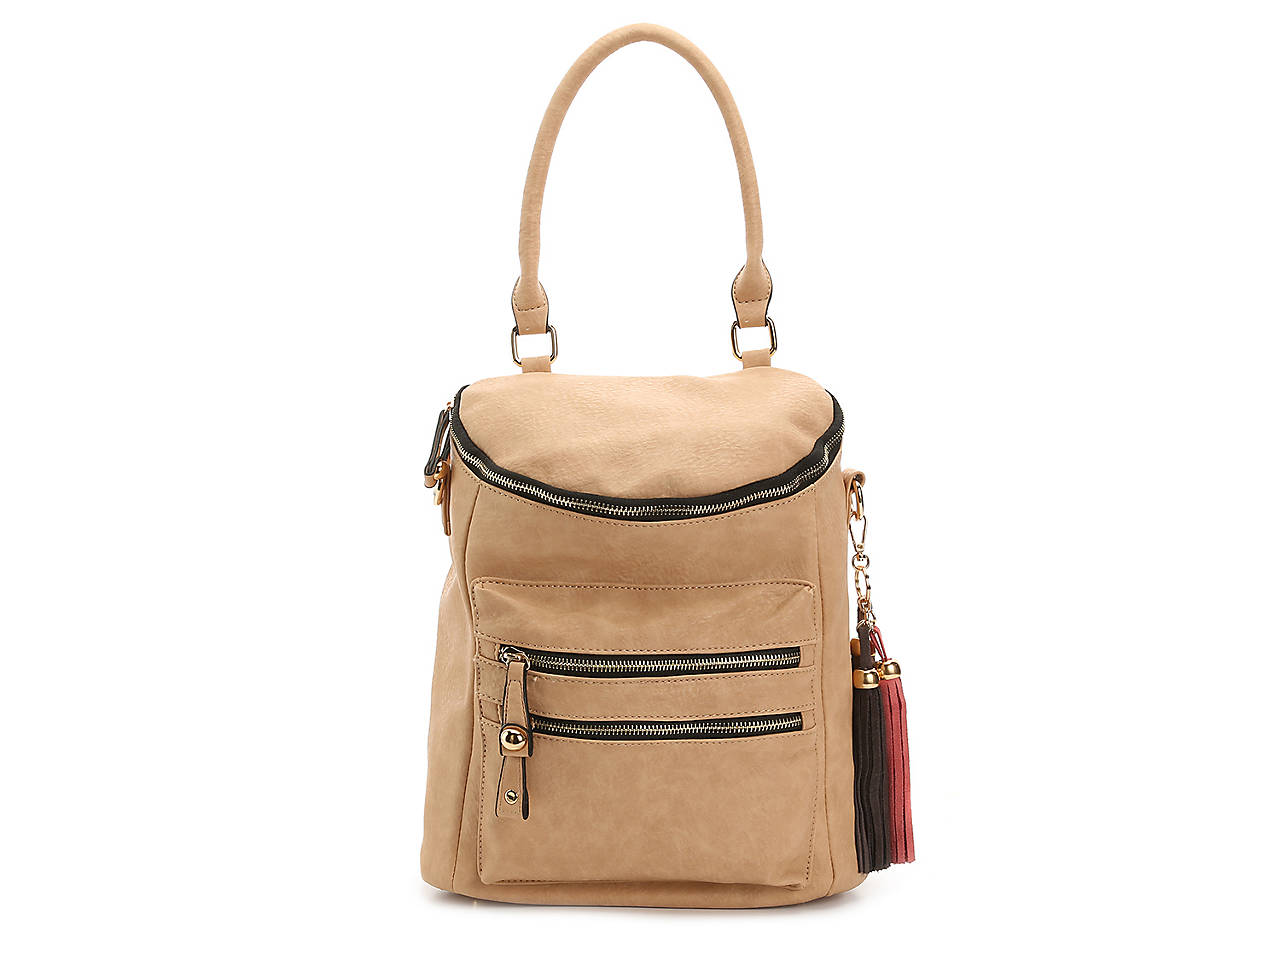 Chinese Laundry Billie Backpack Women's Handbags & Accessories | DSW